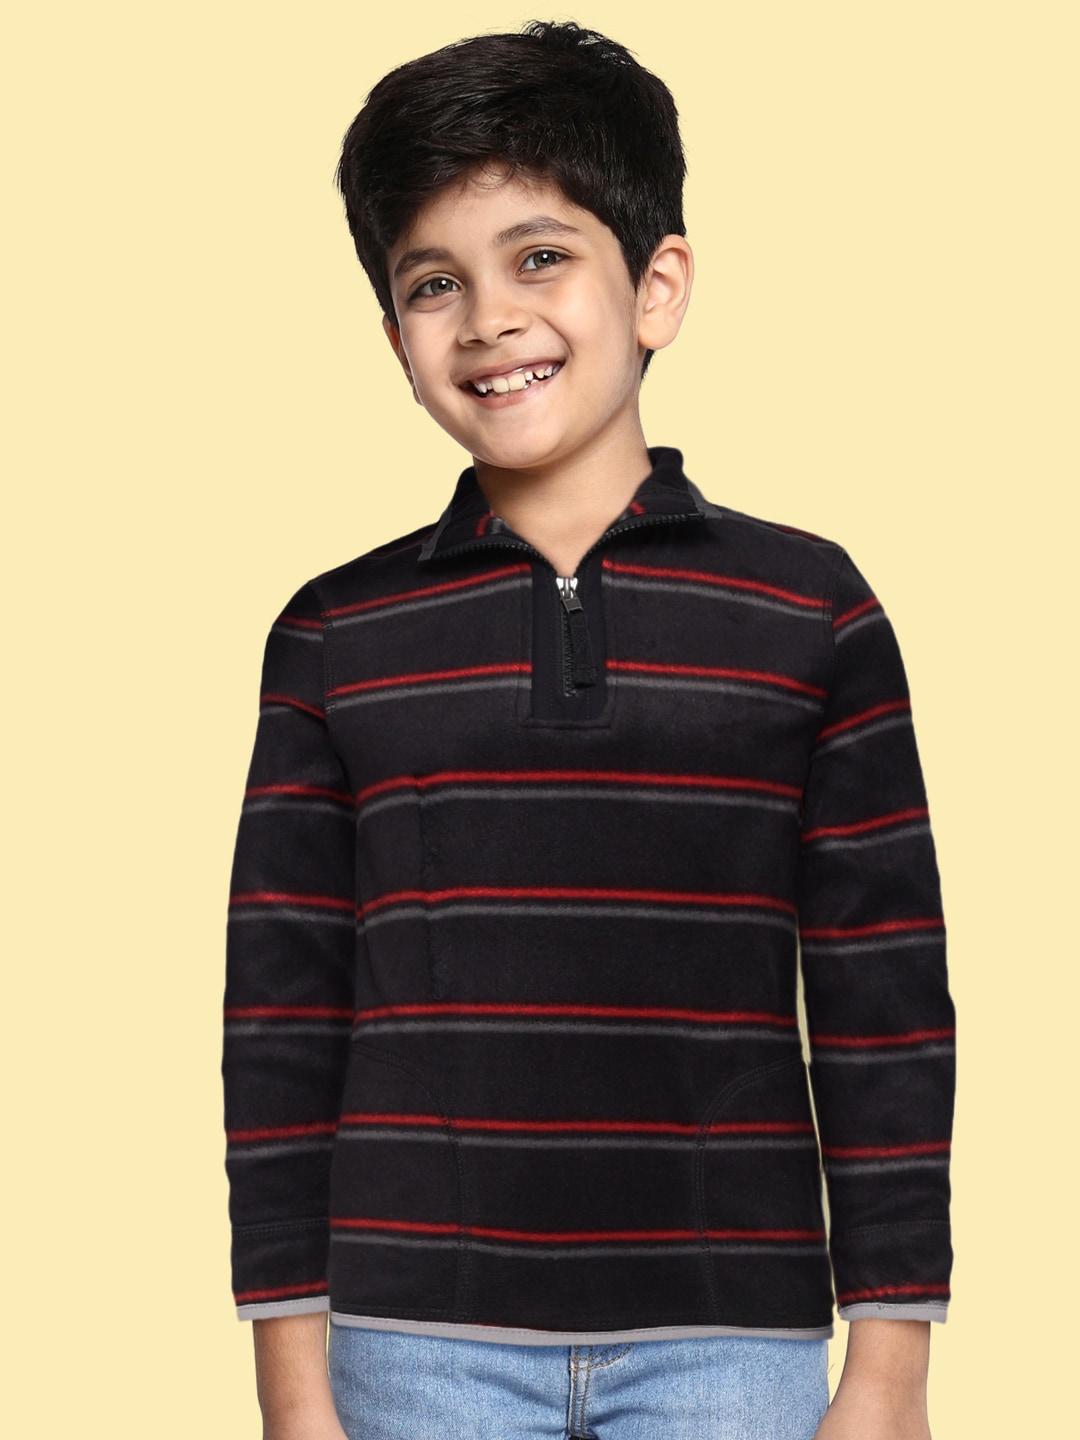 Marks & Spencer Boys Charcoal Grey & Red Striped Sweatshirt